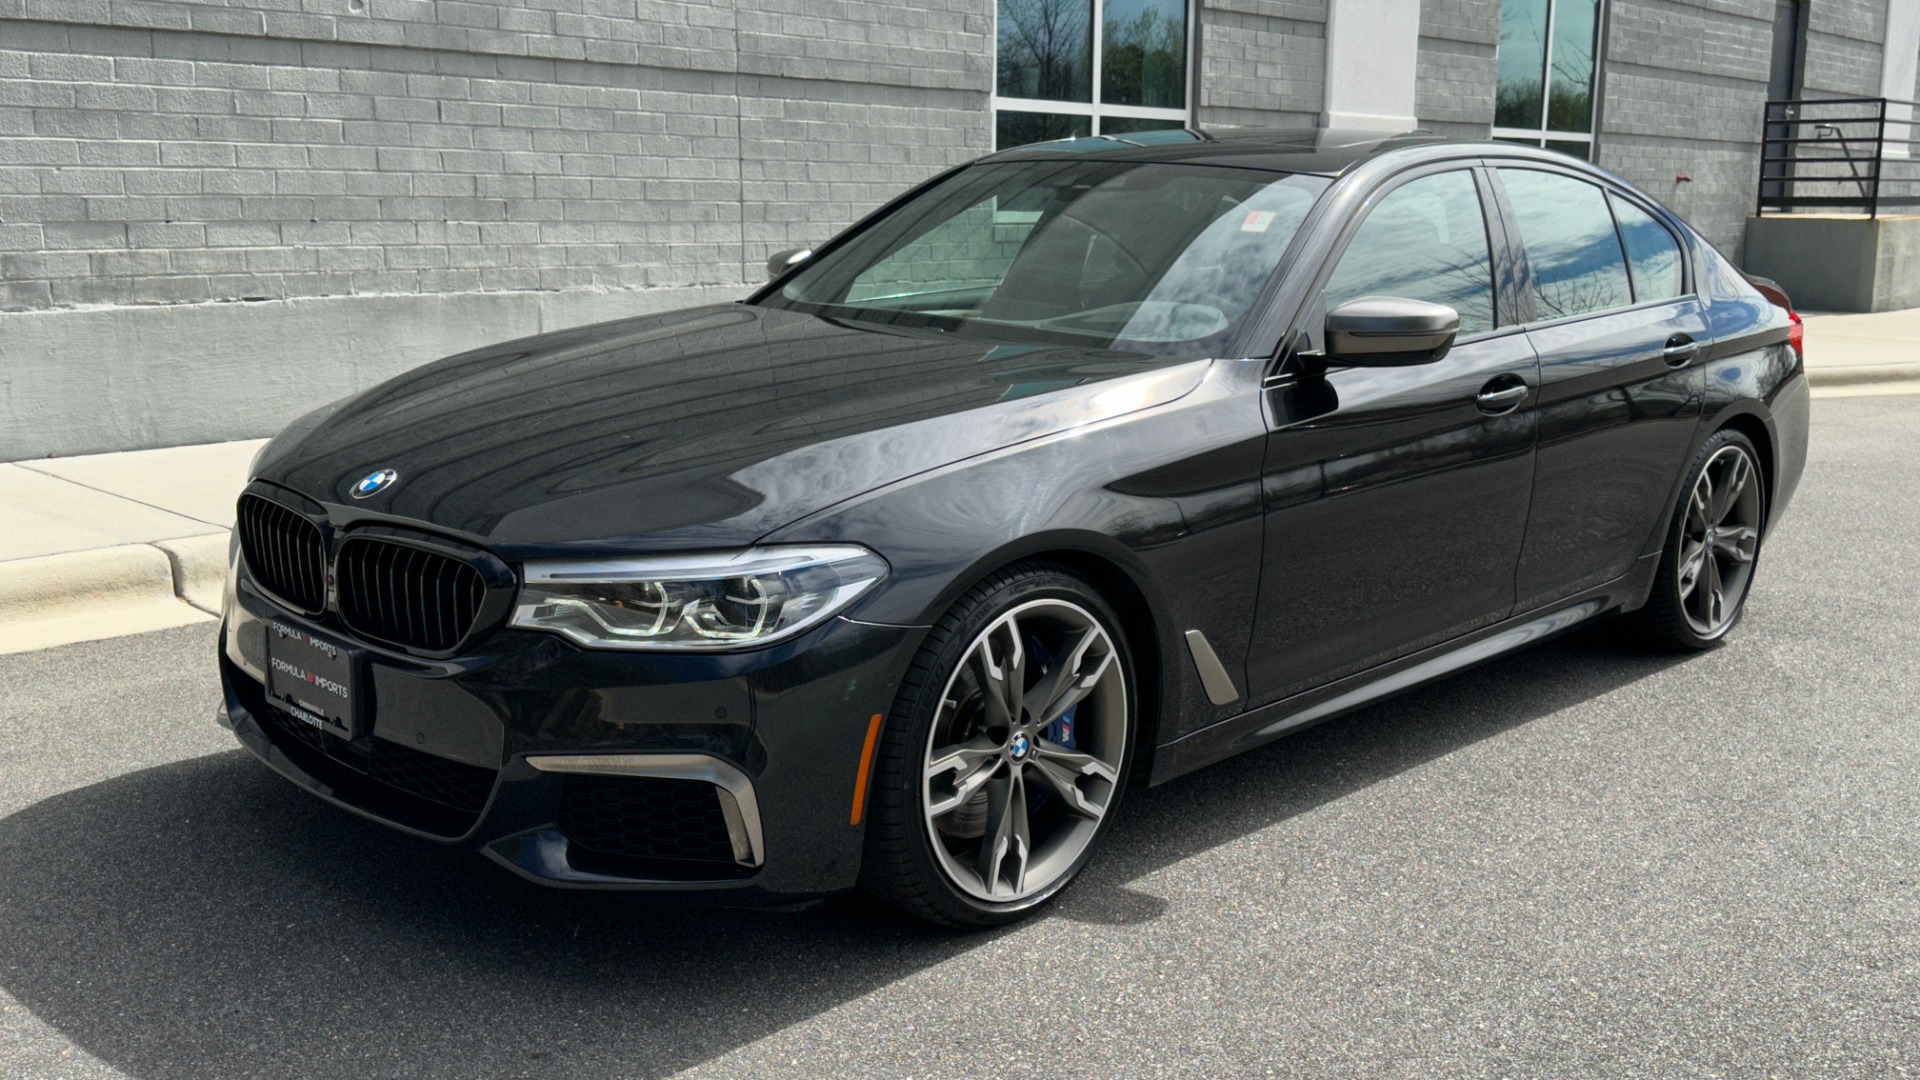 Used 2020 BMW 5 Series M550i xDrive / 20IN WHEELS/ DRIVE ASSIST PLUS / EXECUTIVE PACKAGE / HEATED  for sale $50,495 at Formula Imports in Charlotte NC 28227 2